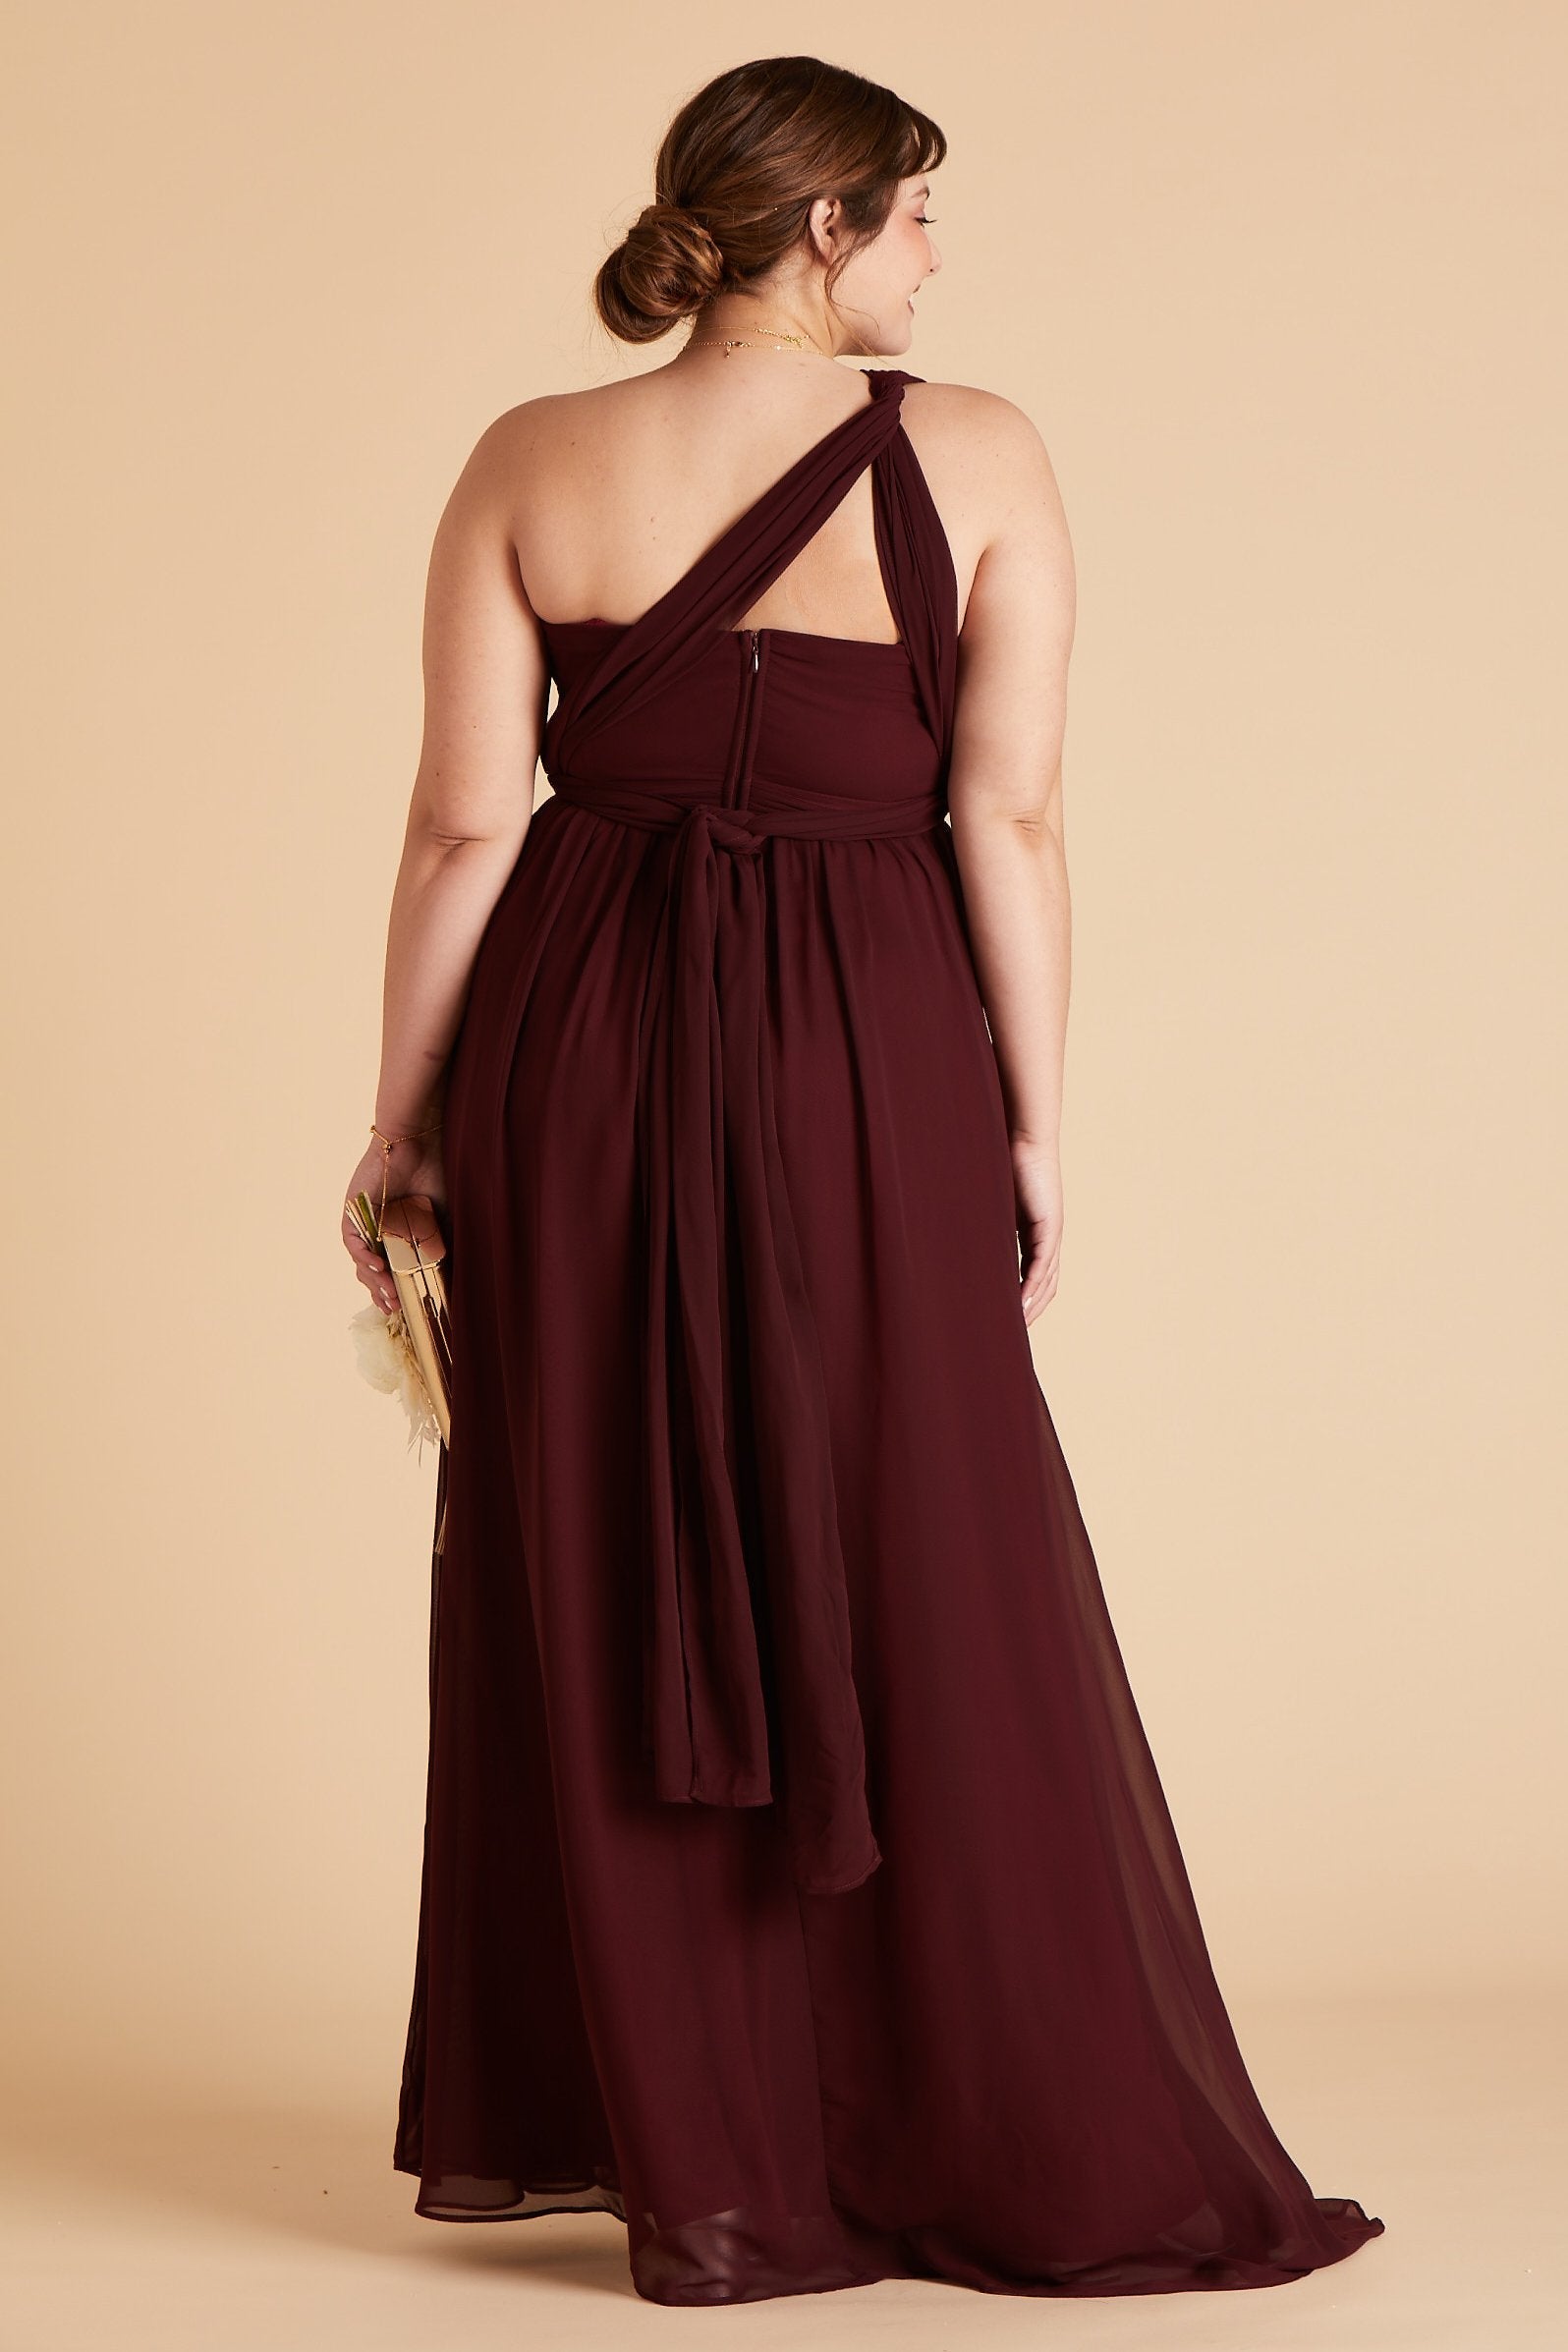 Grace convertible plus size bridesmaid dress in cabernet burgundy chiffon by Birdy Grey, back view